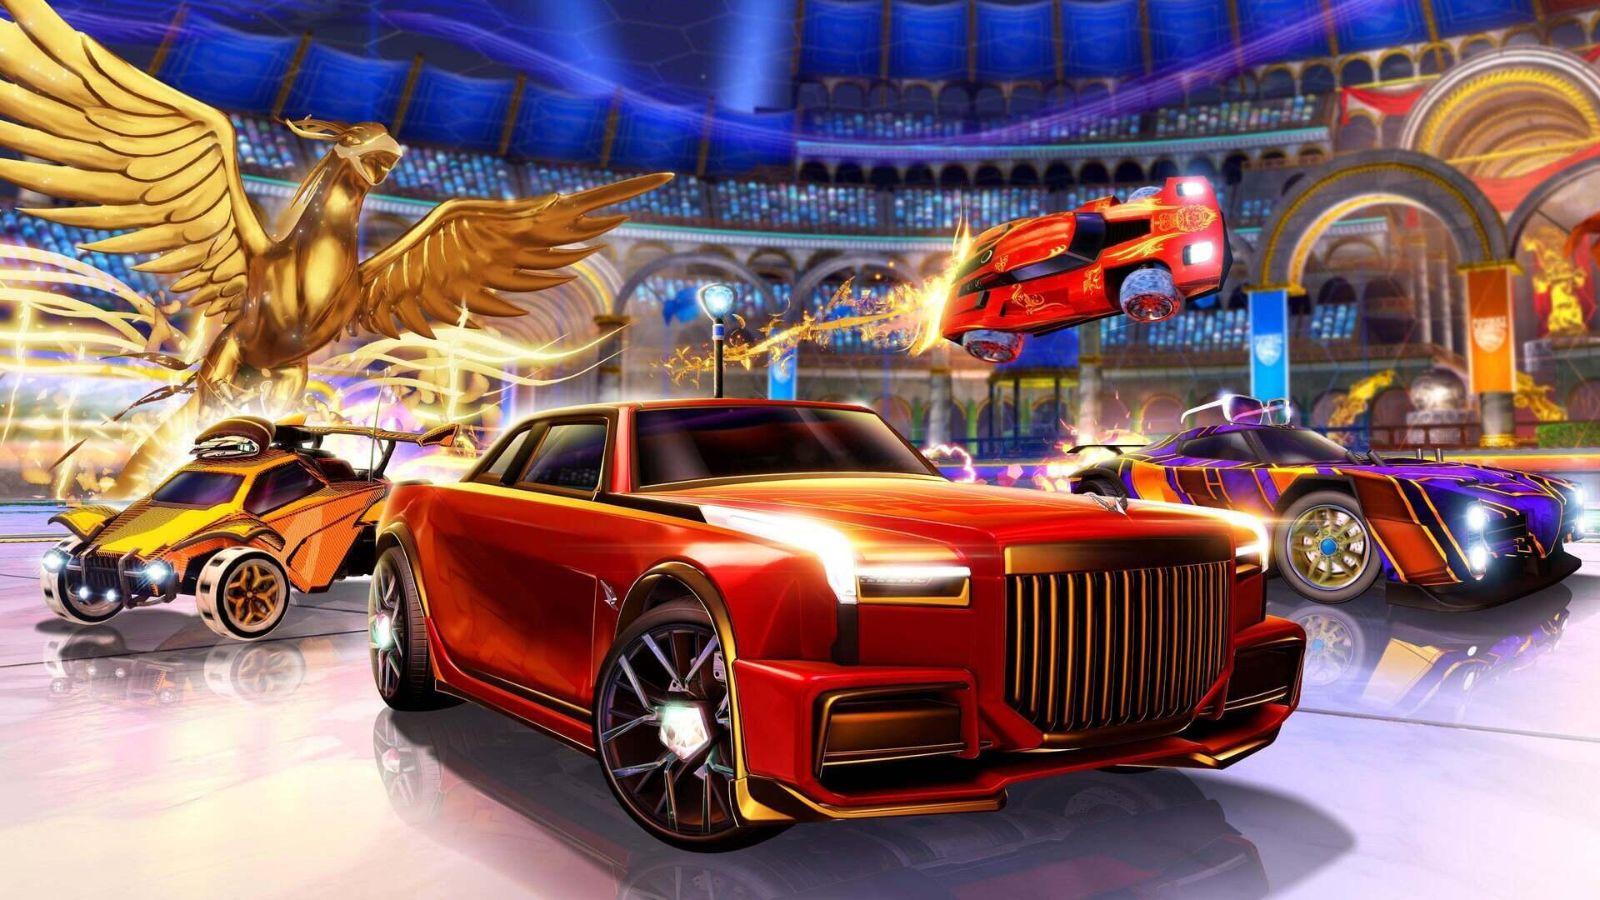 THE MOST EXPENSIVE Rocket League Items - TOP 9